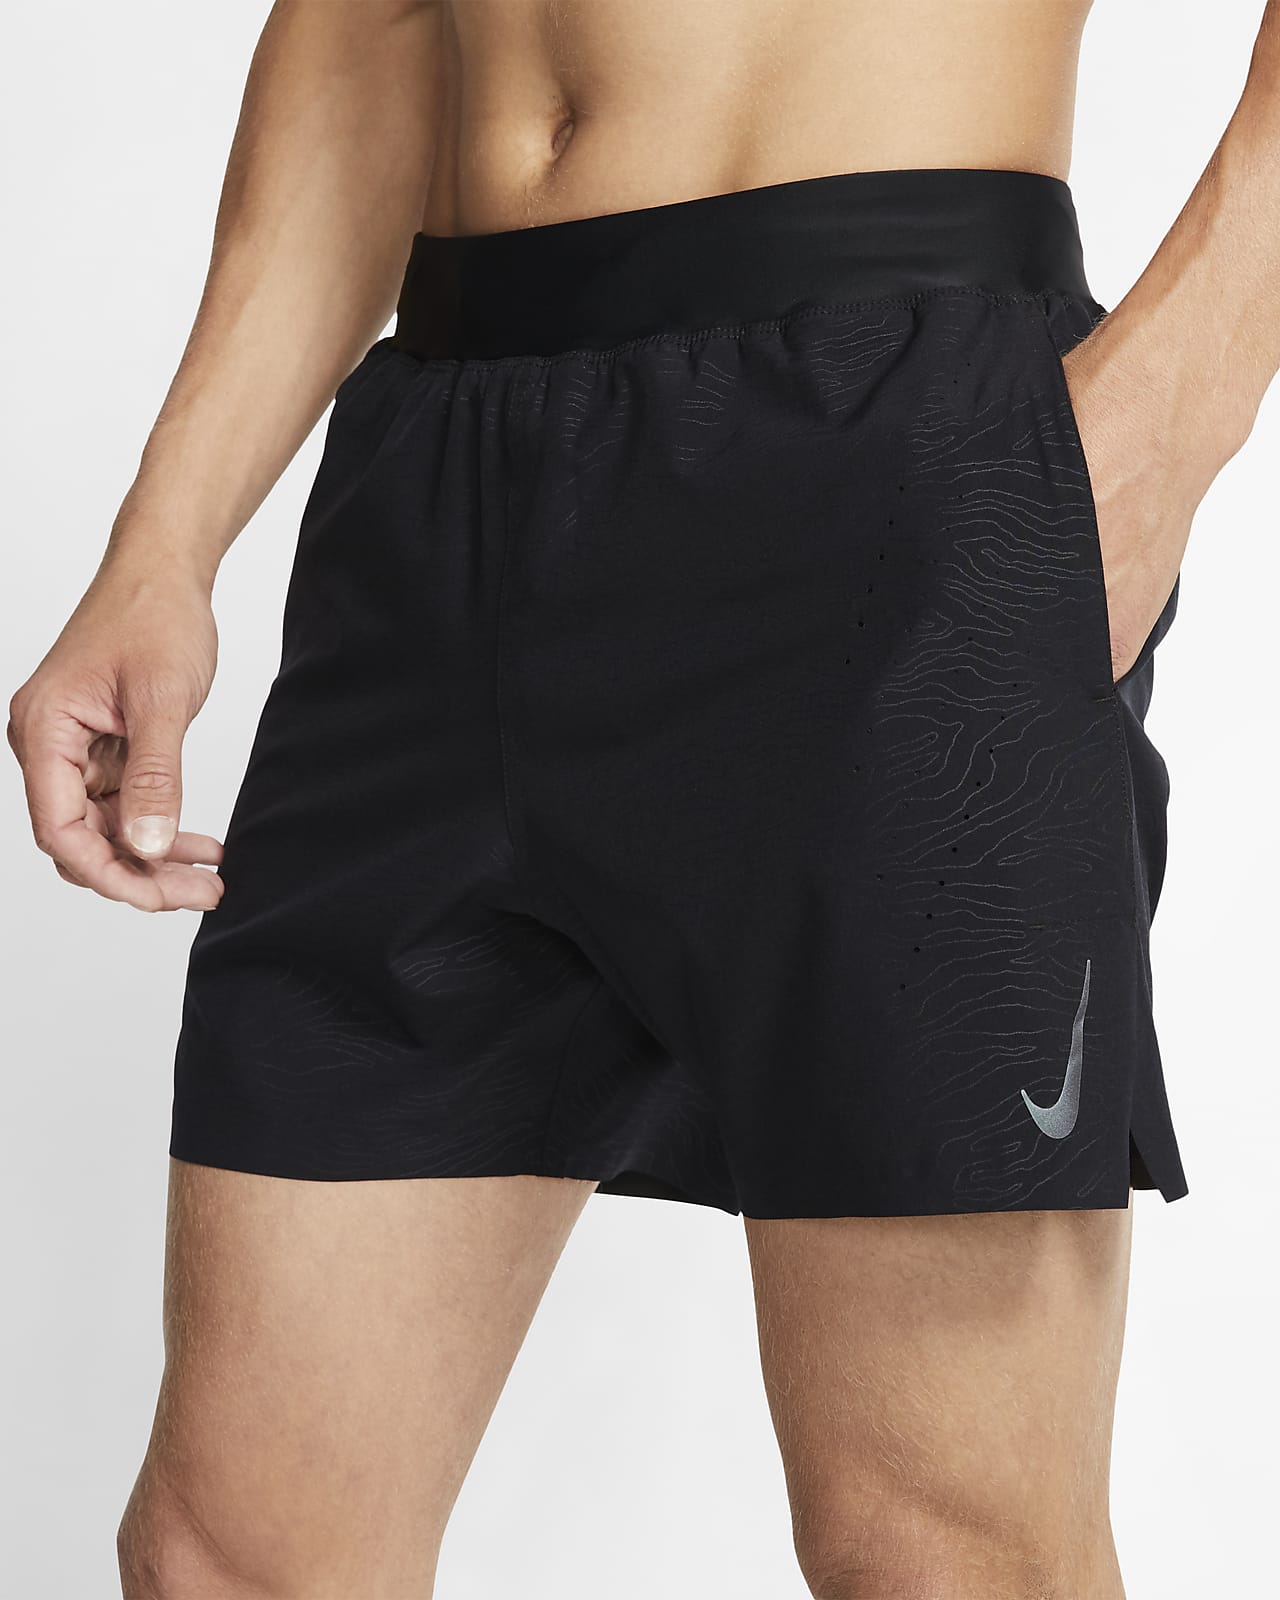 nike volleyball shorts 5 inch